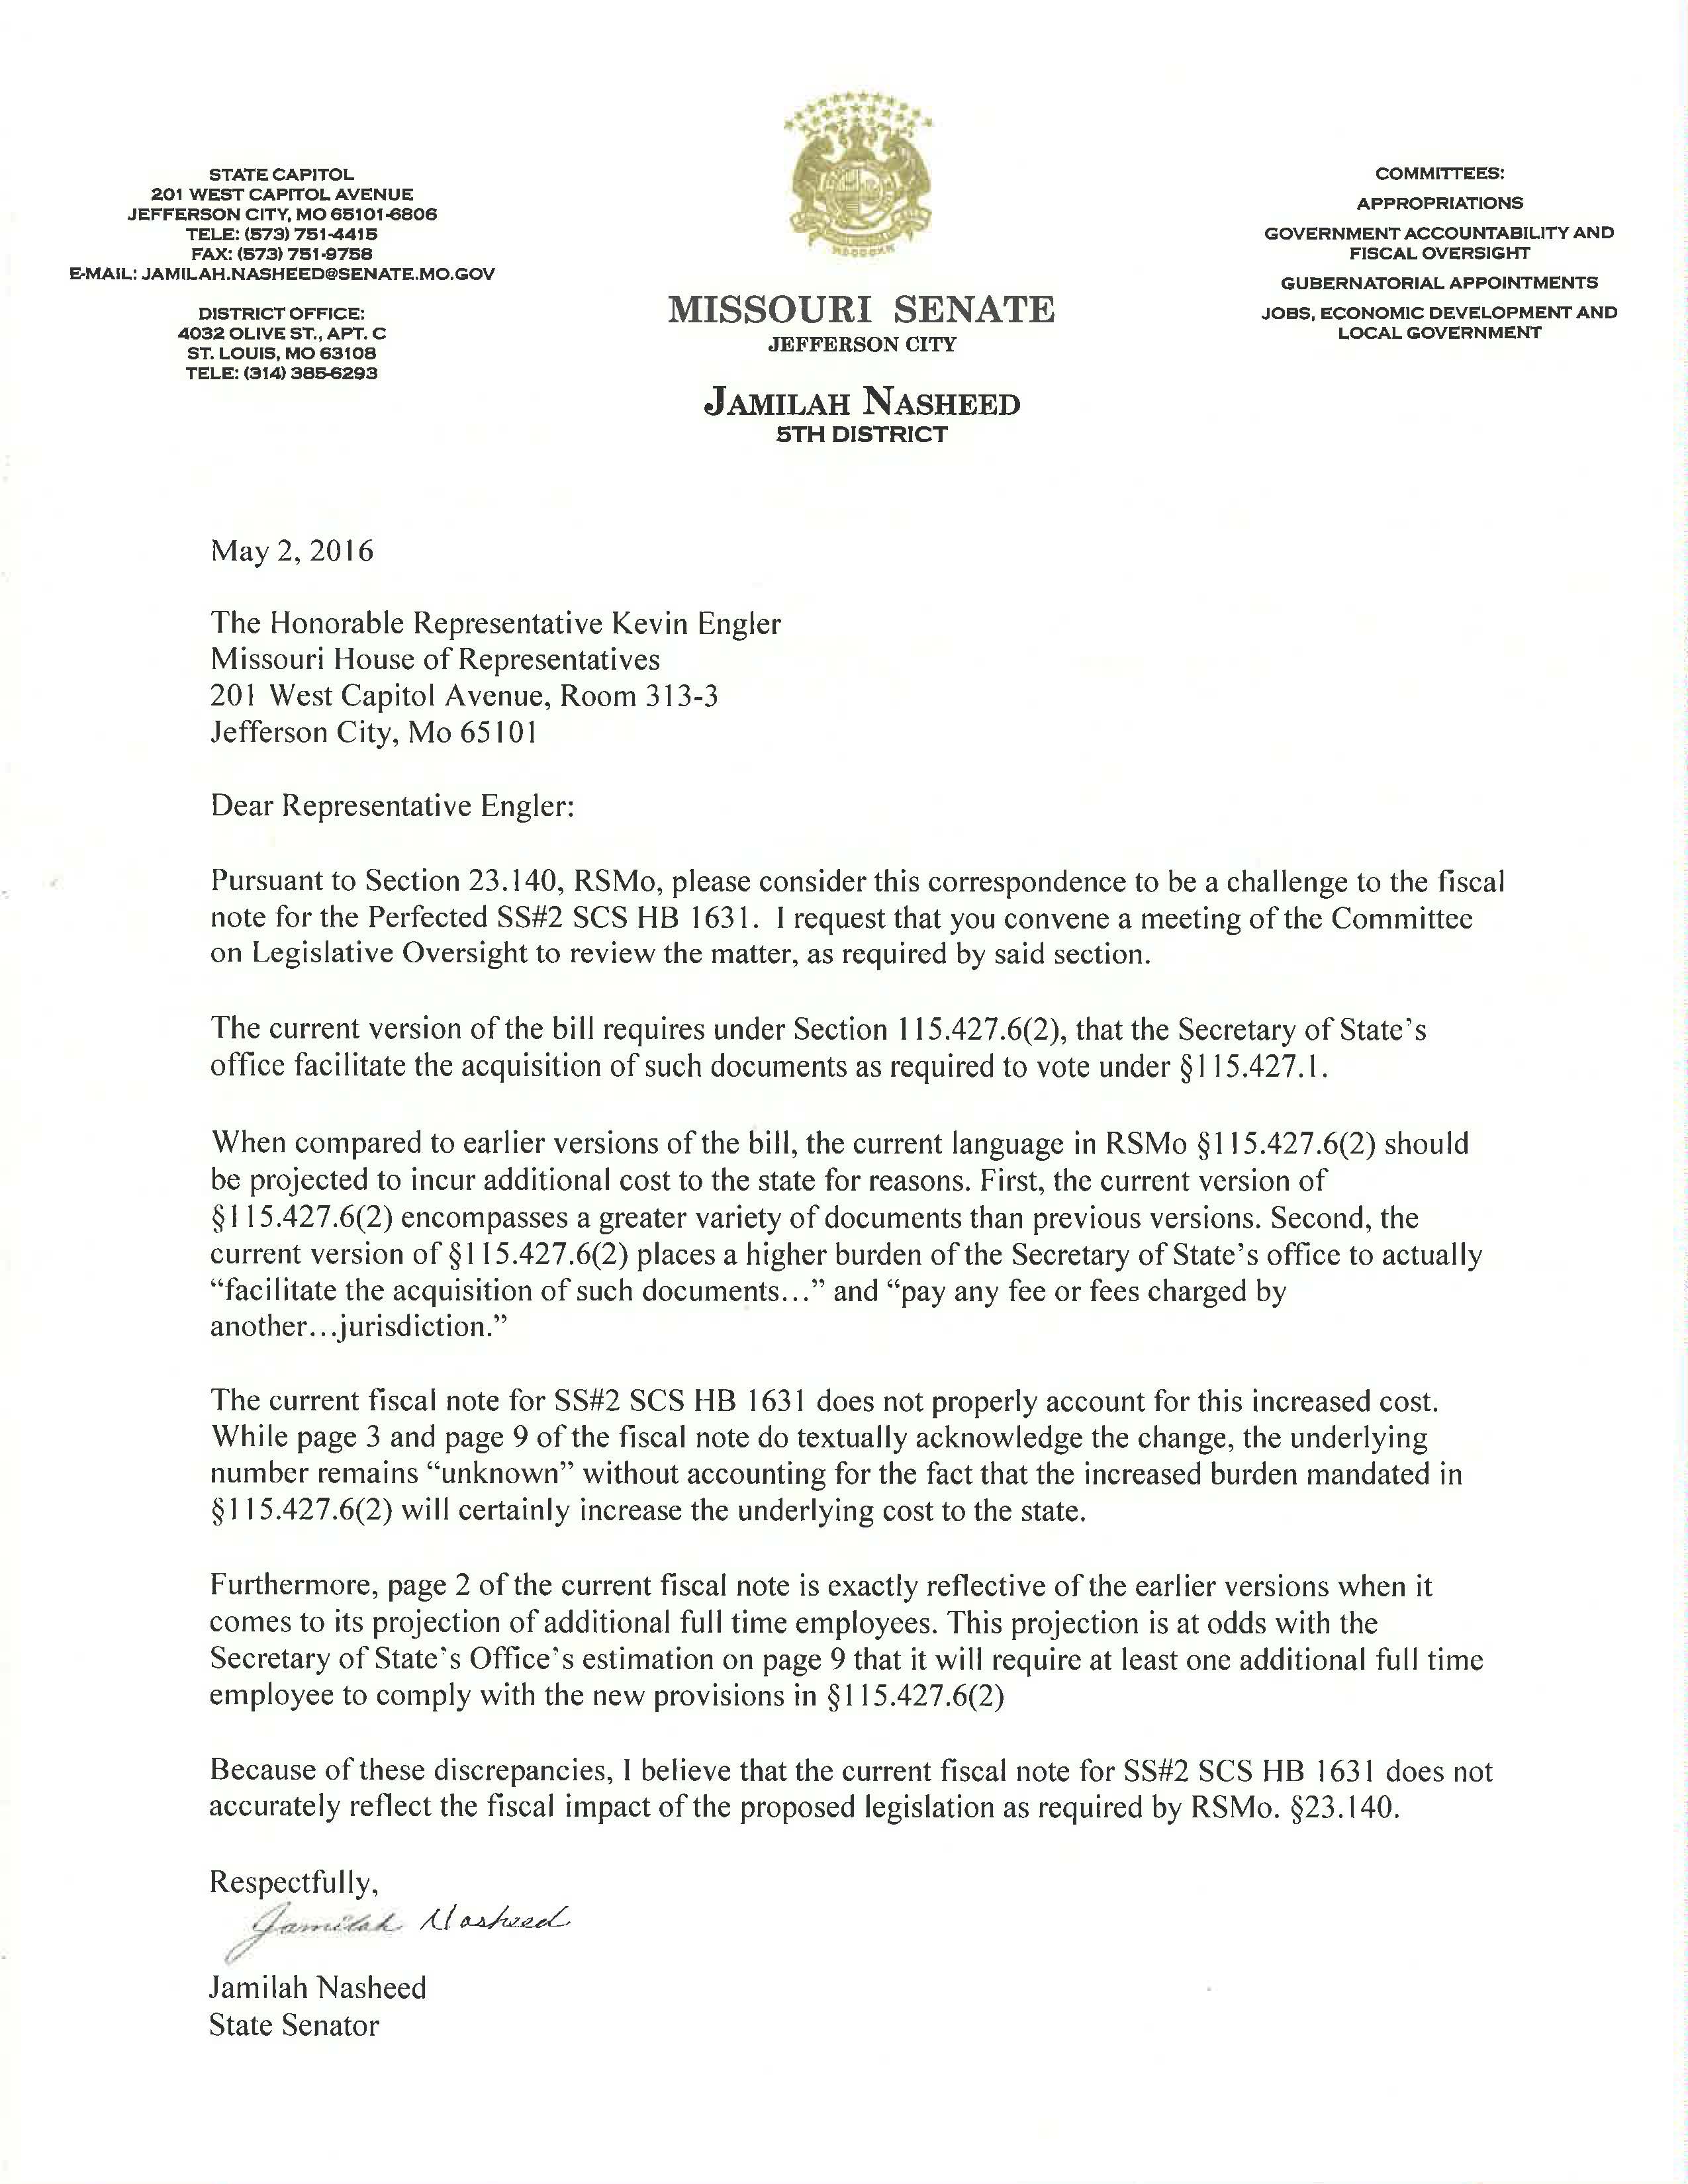 Voter ID FIscal note letter (002)